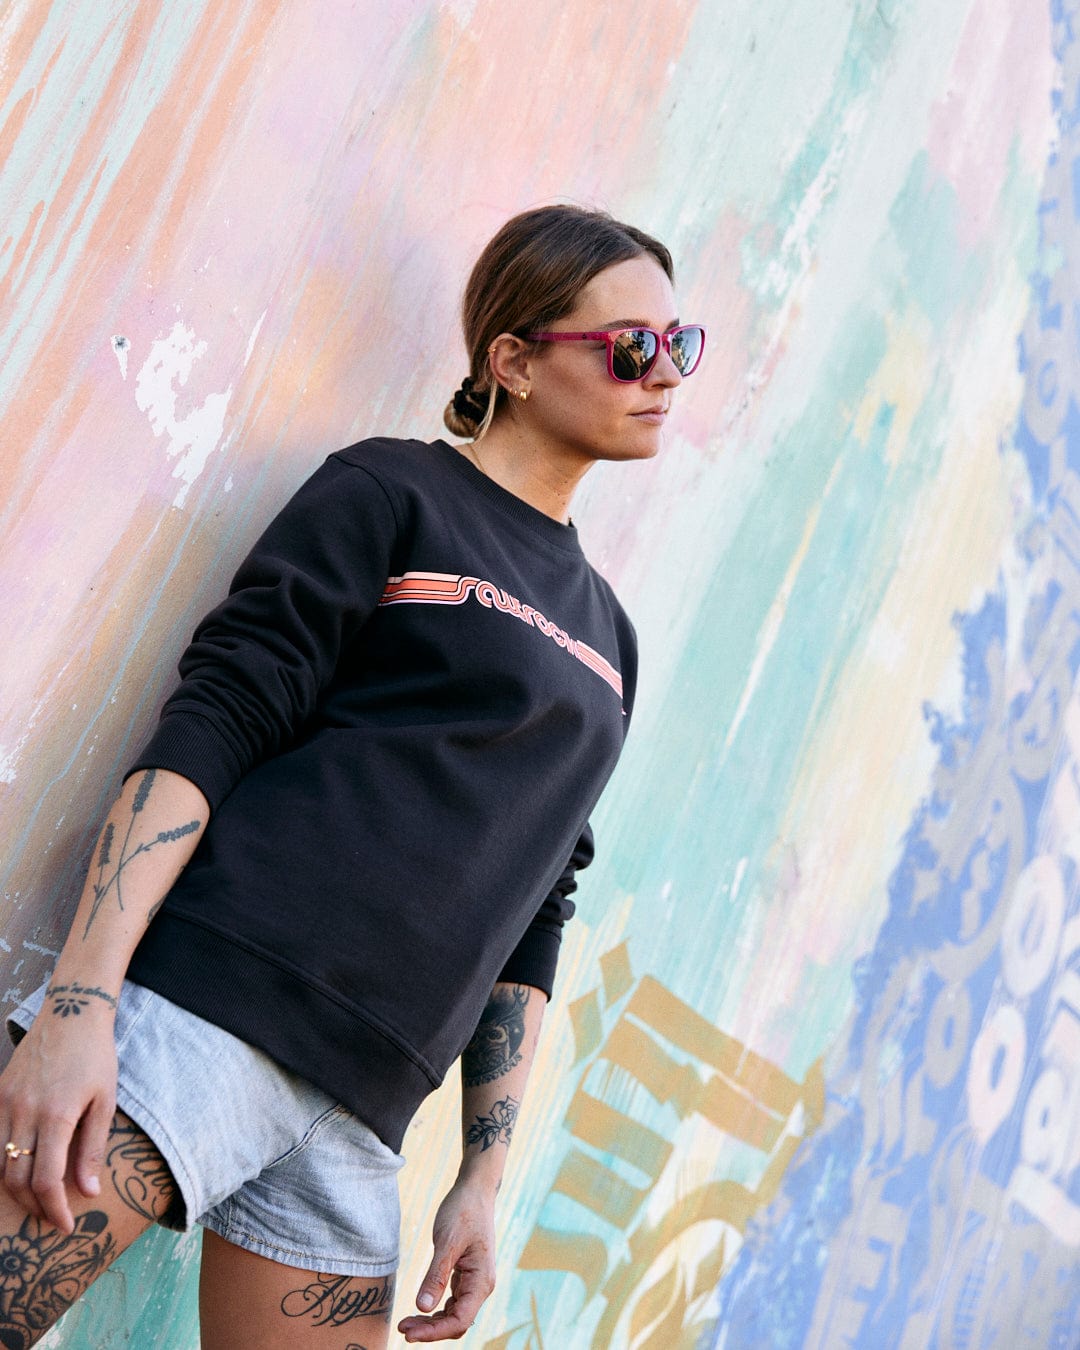 A woman in sunglasses and a Saltrock Retro Ribbon Tape - Womens Sweatshirt - Dark Grey stands in front of a colorful graffitied wall, her hands partially in her shorts pockets.